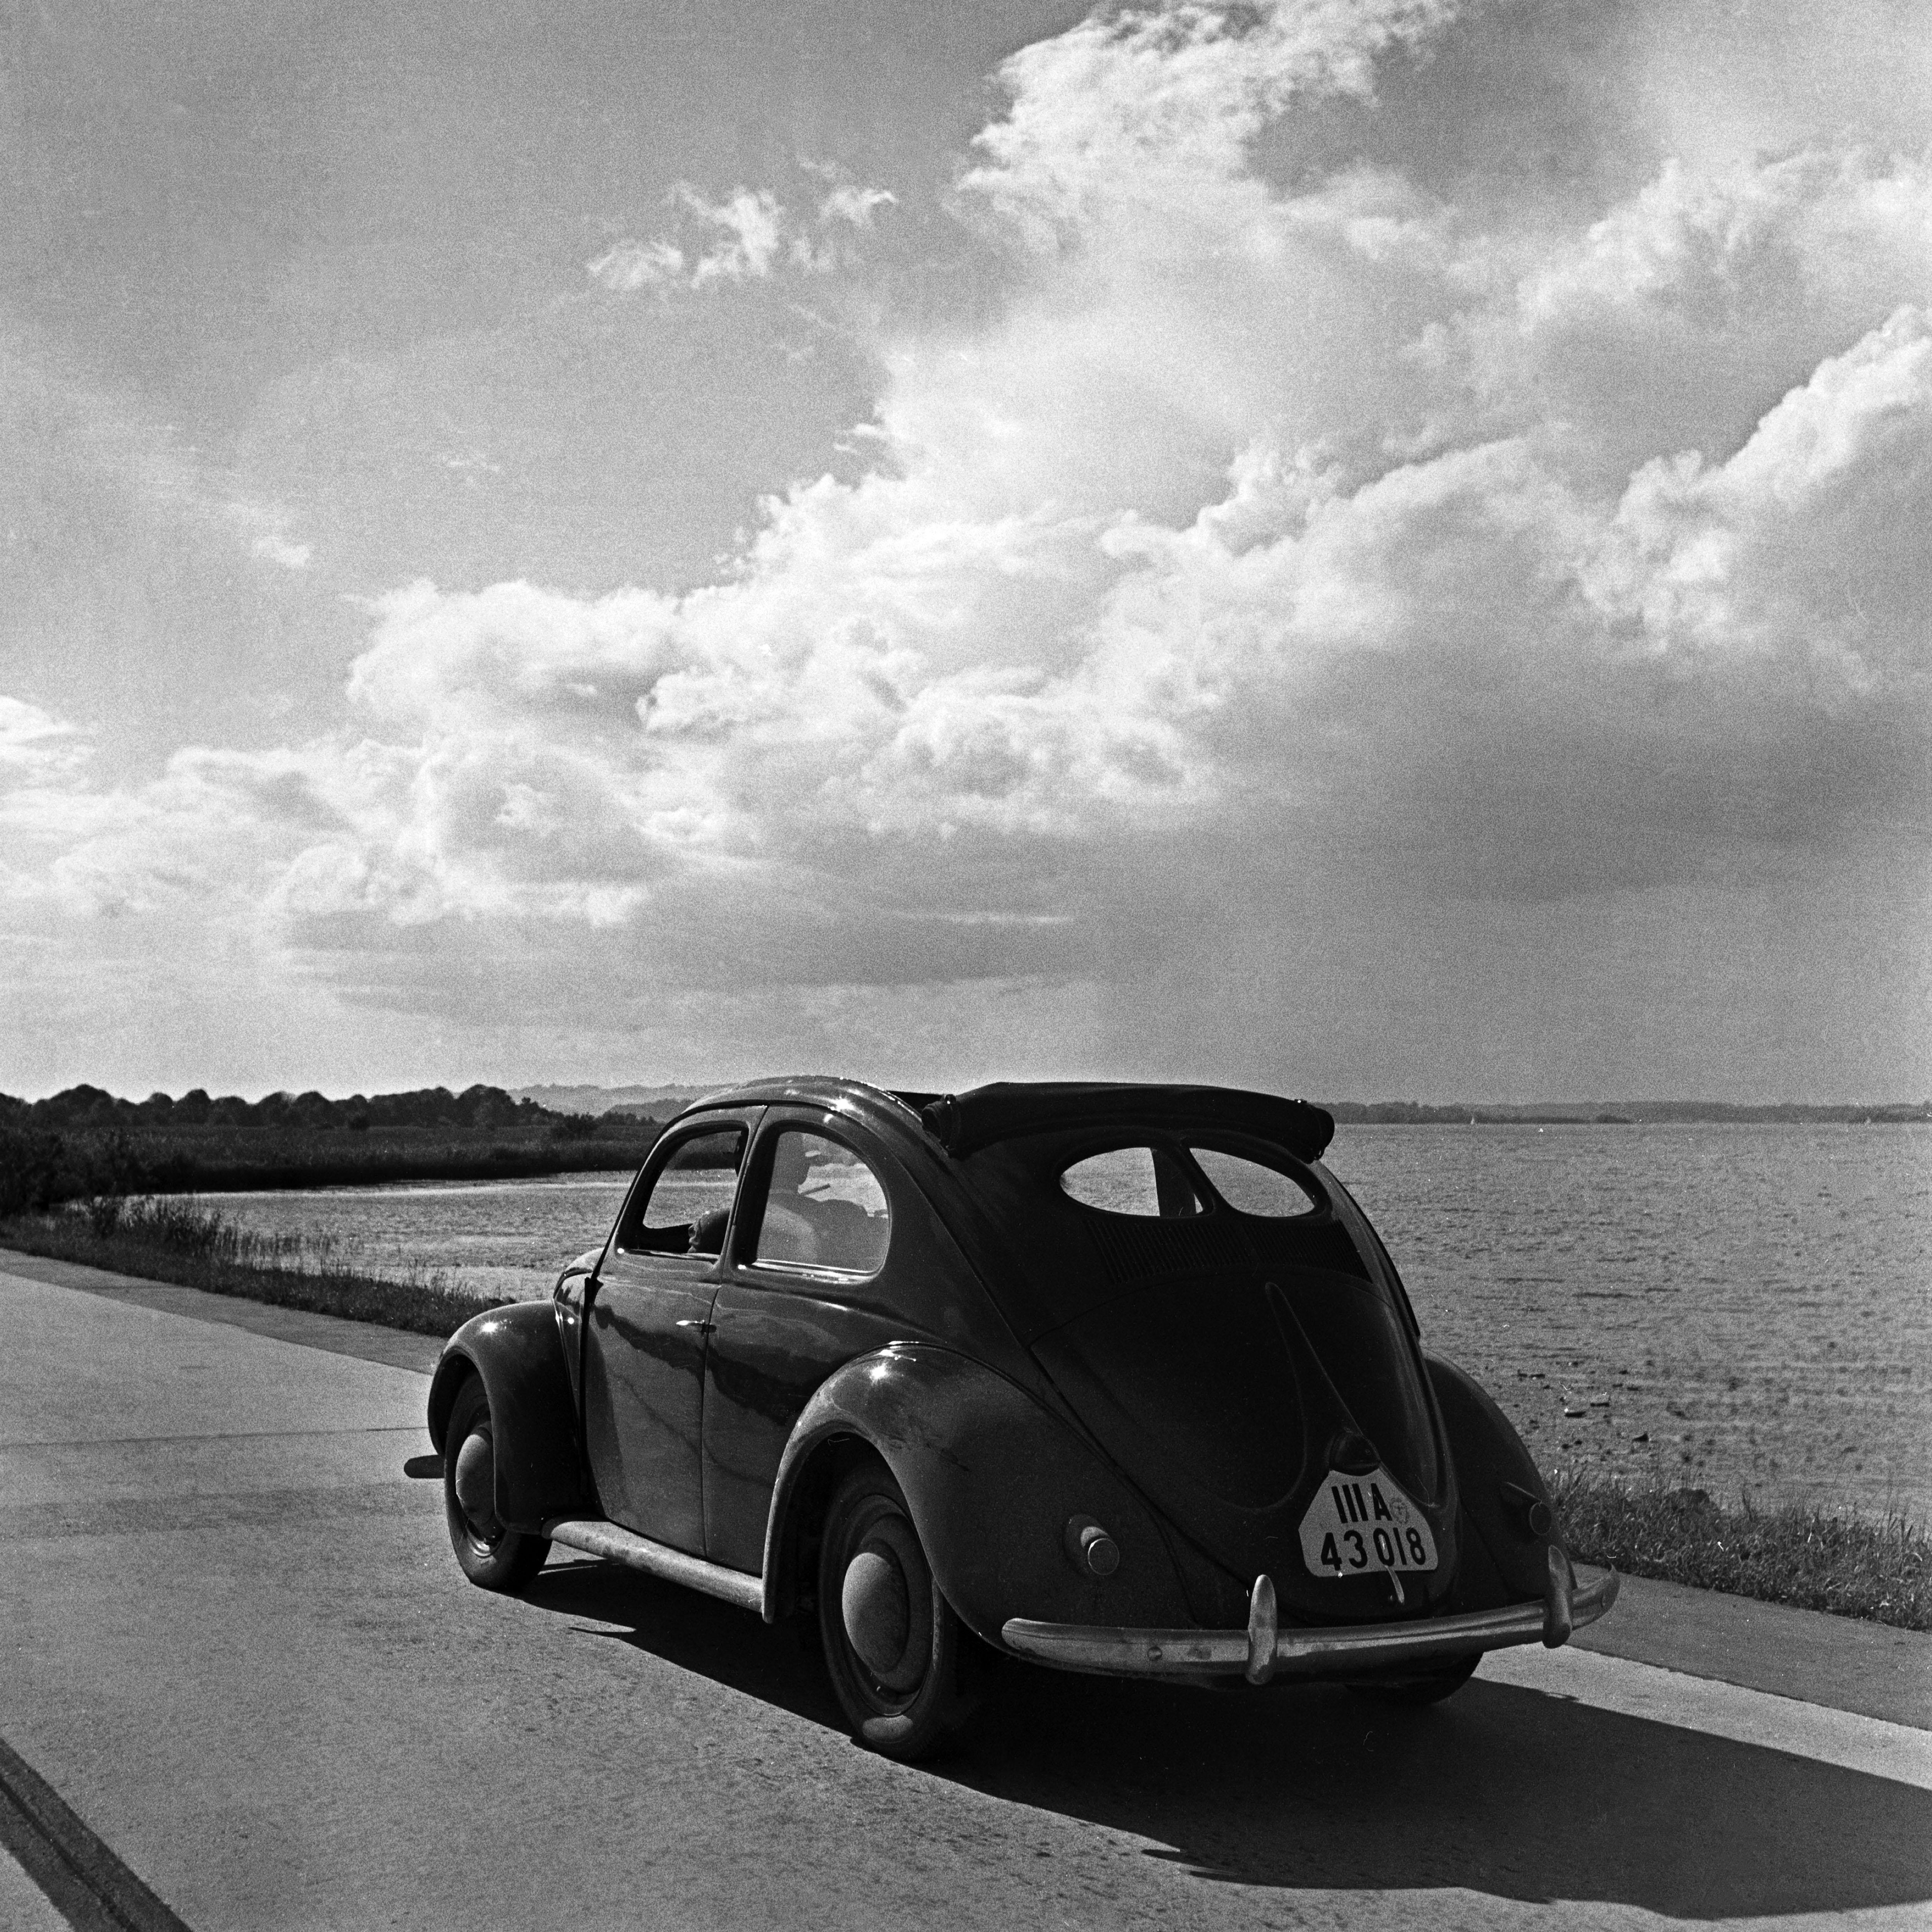 Karl Heinrich Lämmel Black and White Photograph - Volkswagen beetle on the streets next to the sea, Germany 1939 Printed Later 